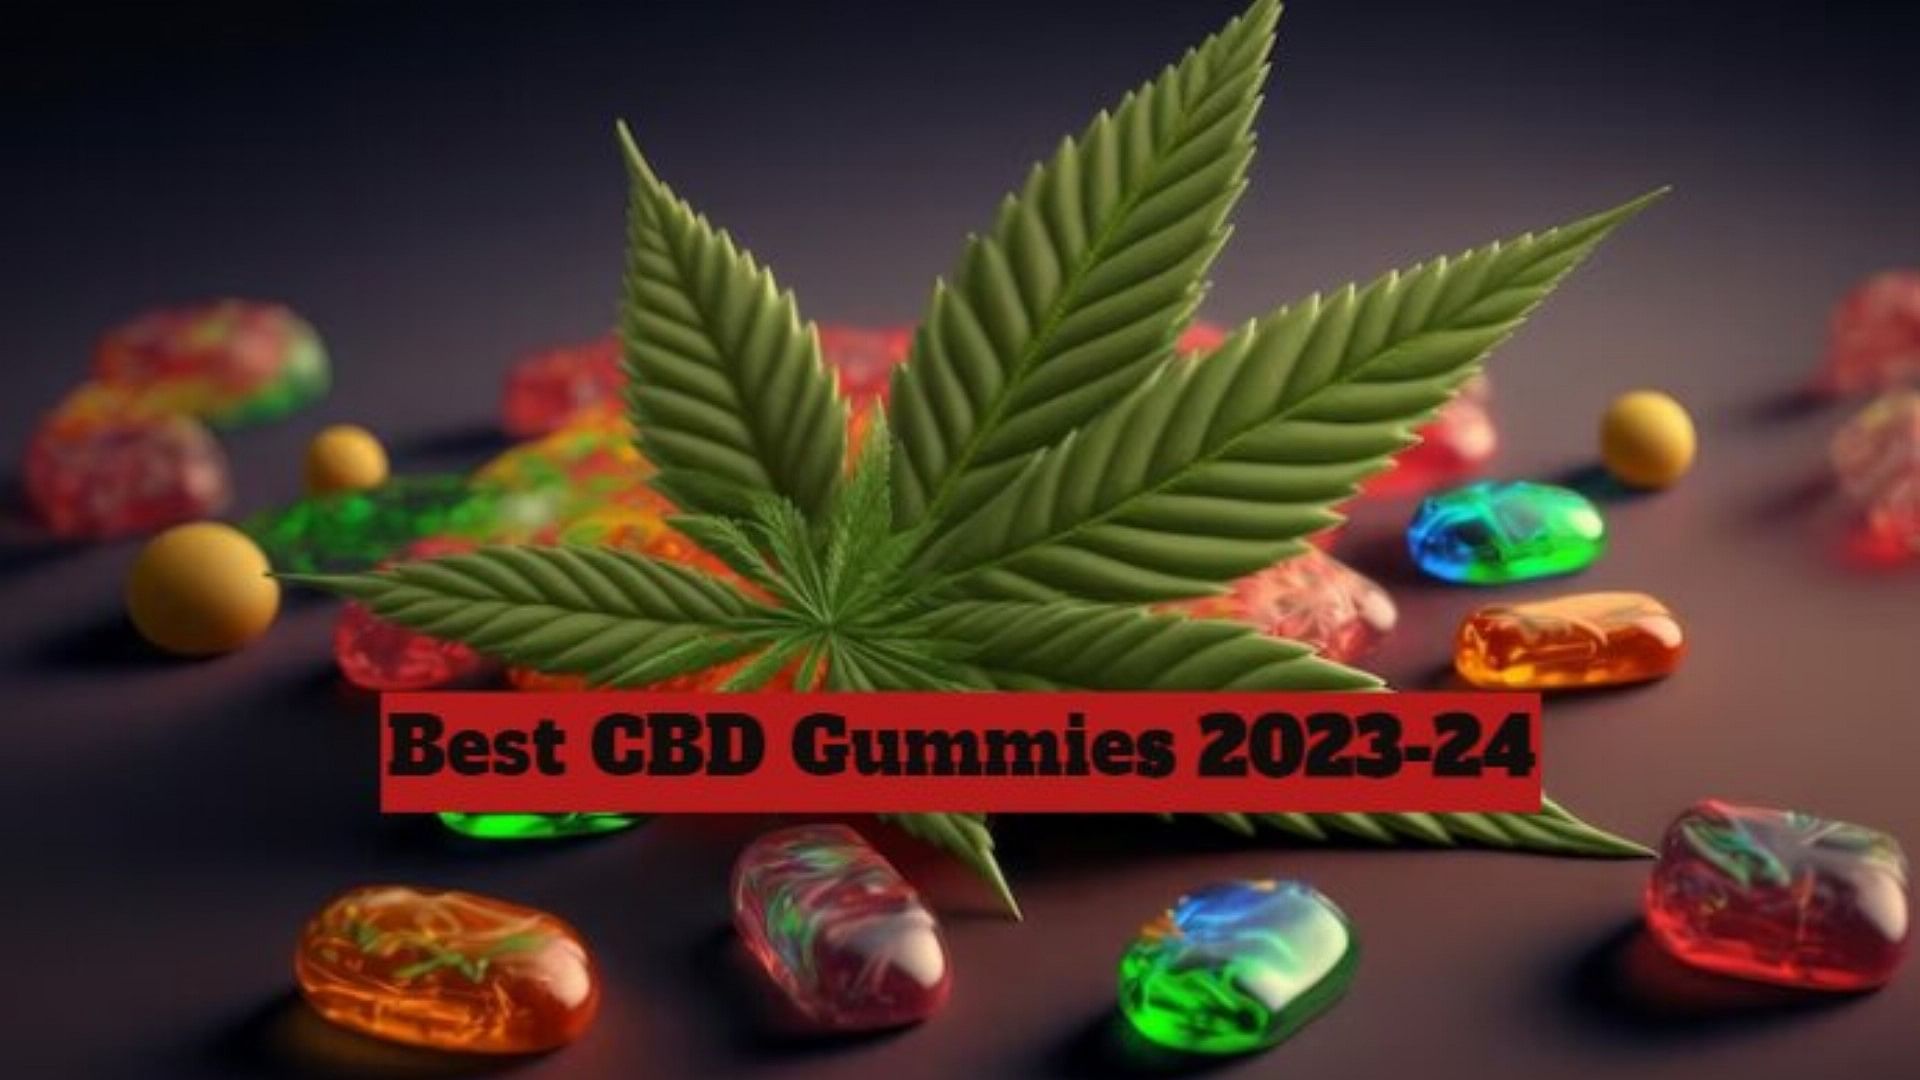 Dr Oz Ben Carson CBD Gummies: Say the Final Goodbye to Your Pains!